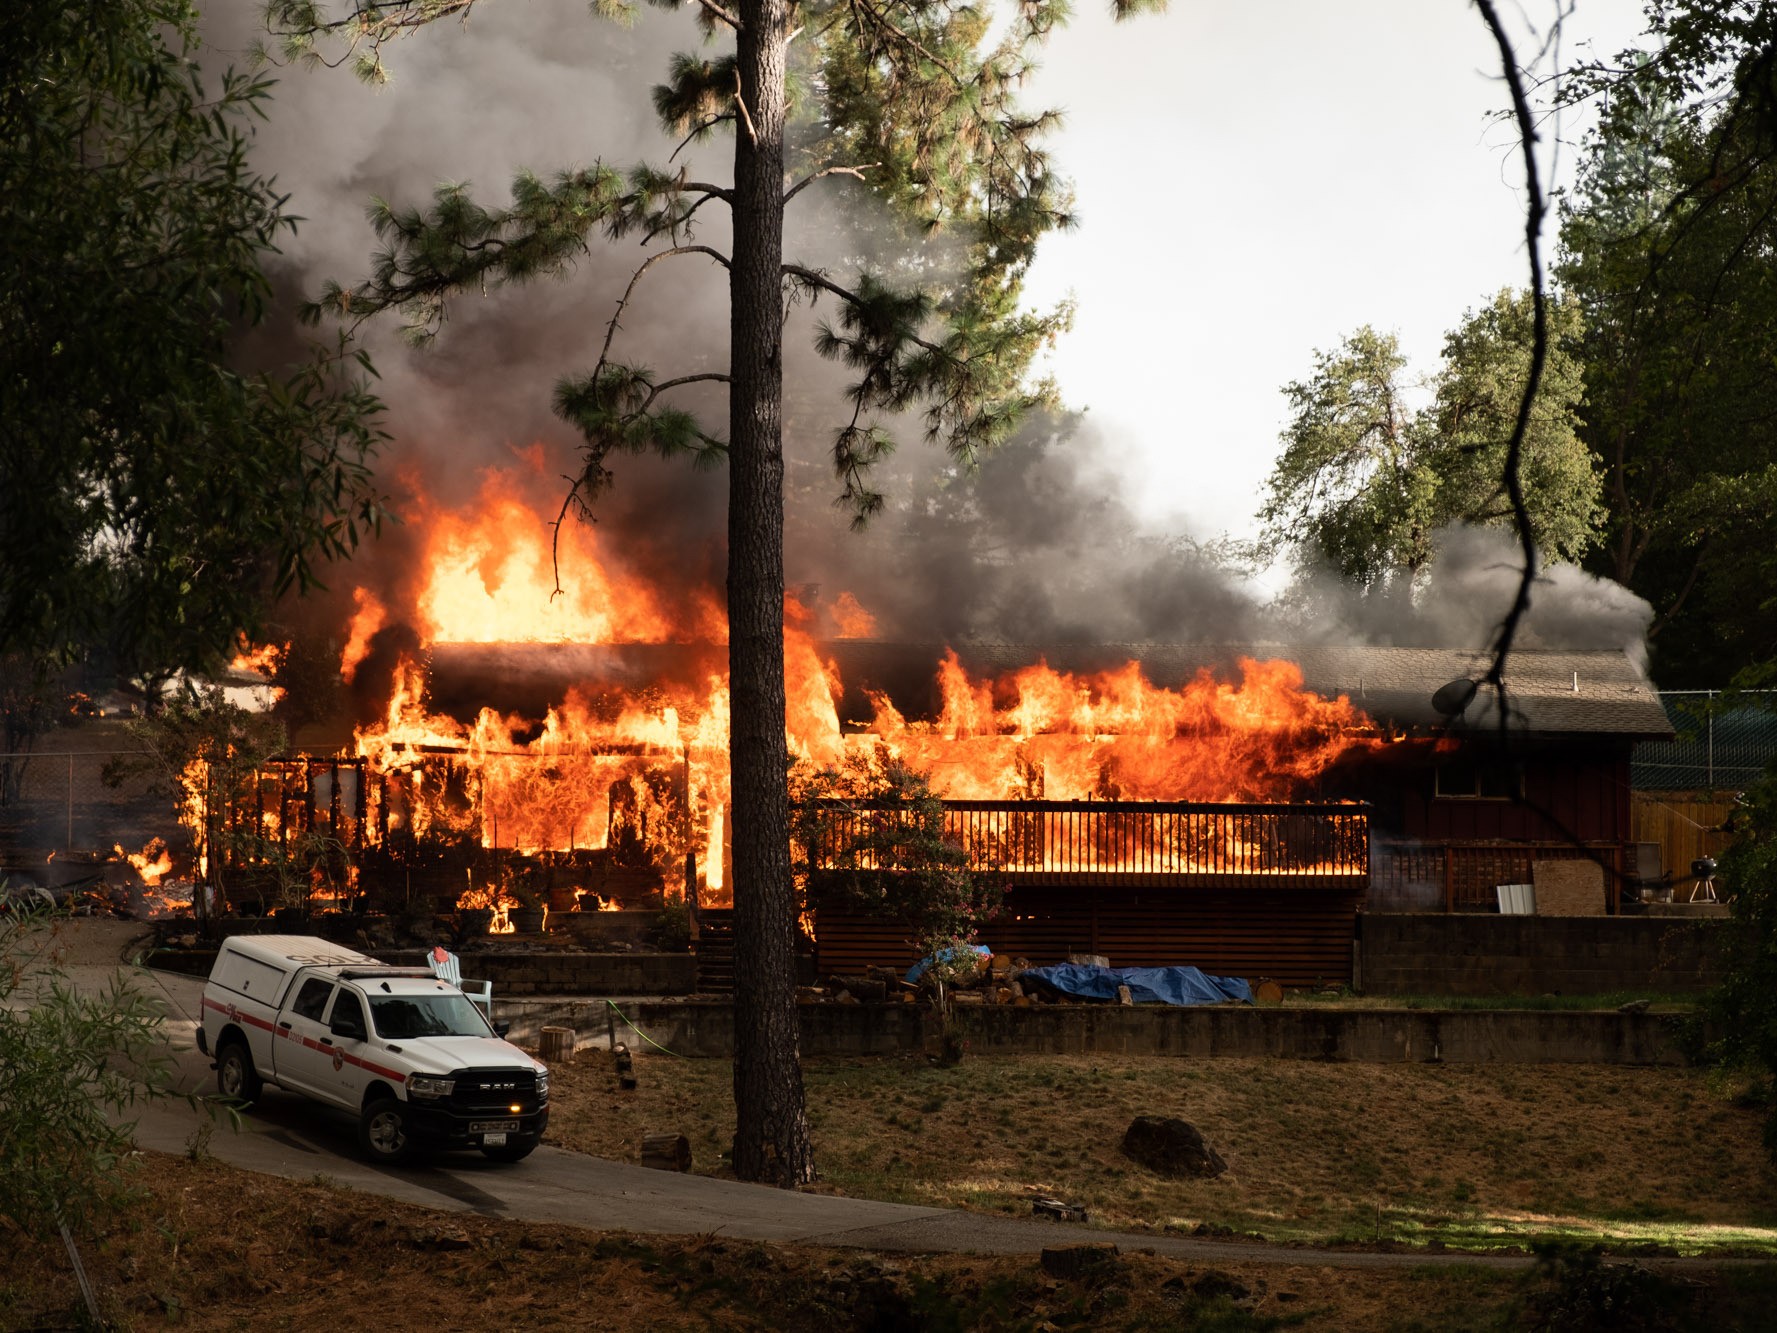 River Fire Prompts Evacuation Order For Colfax, Destroys Structures In